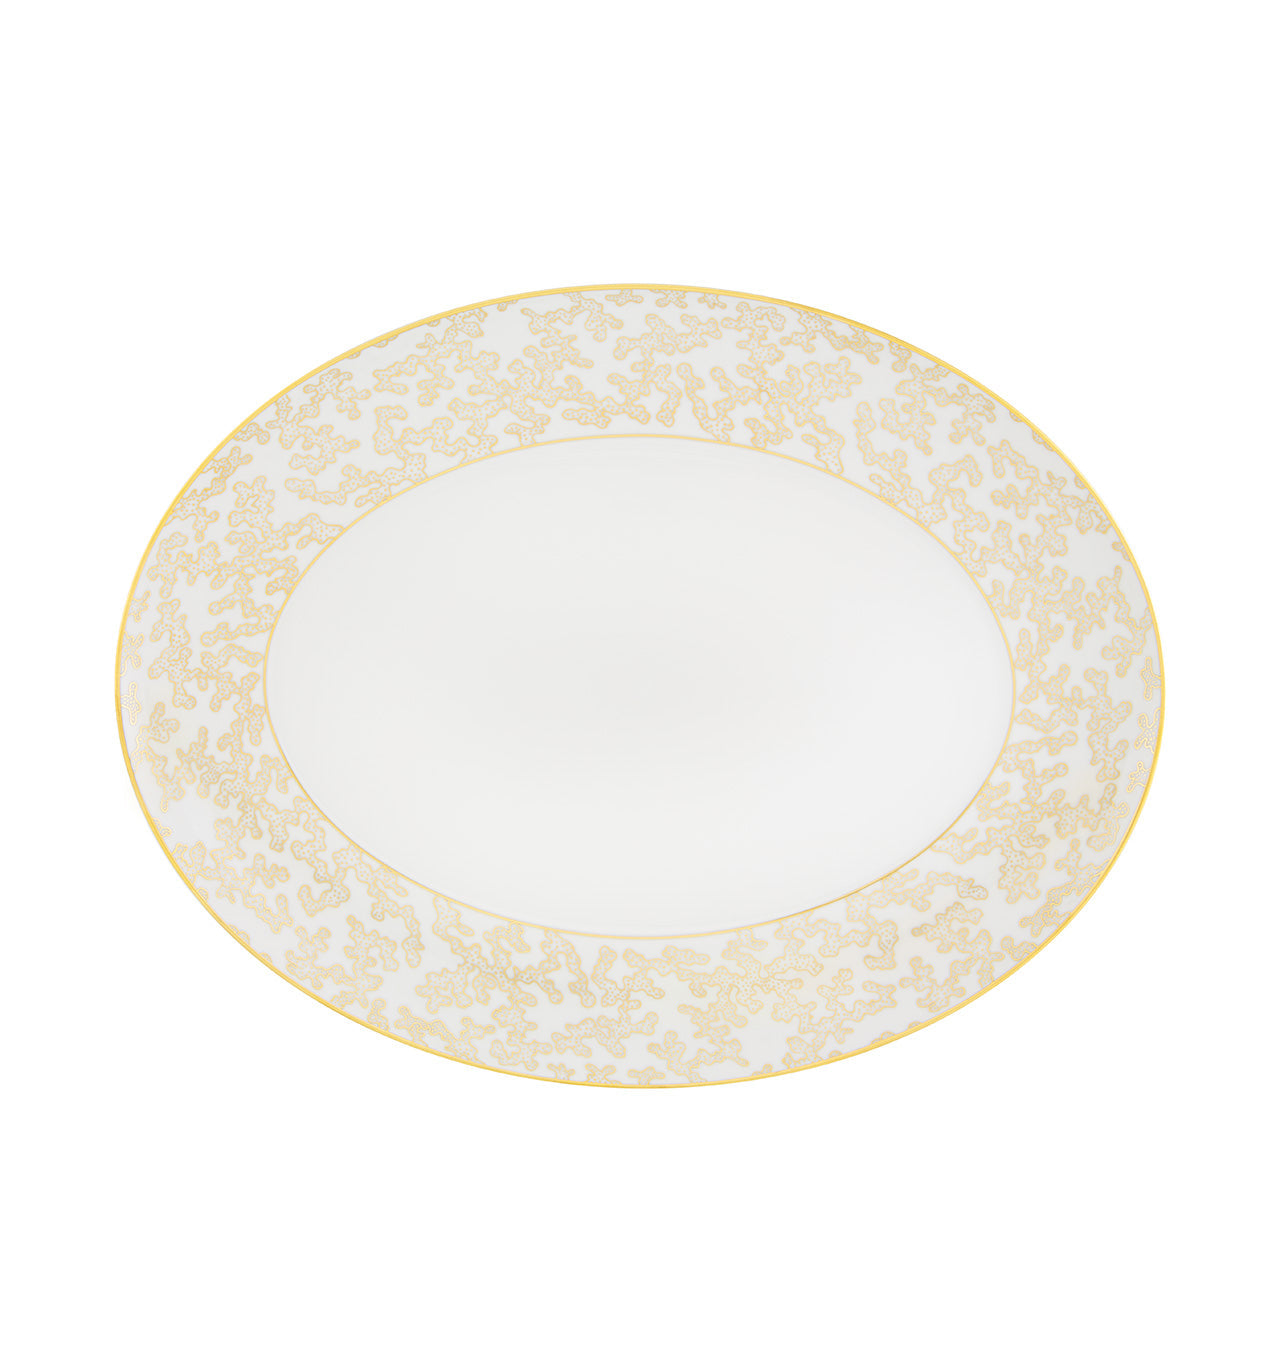 Cailloute - Large Oval Platter - LAZADO